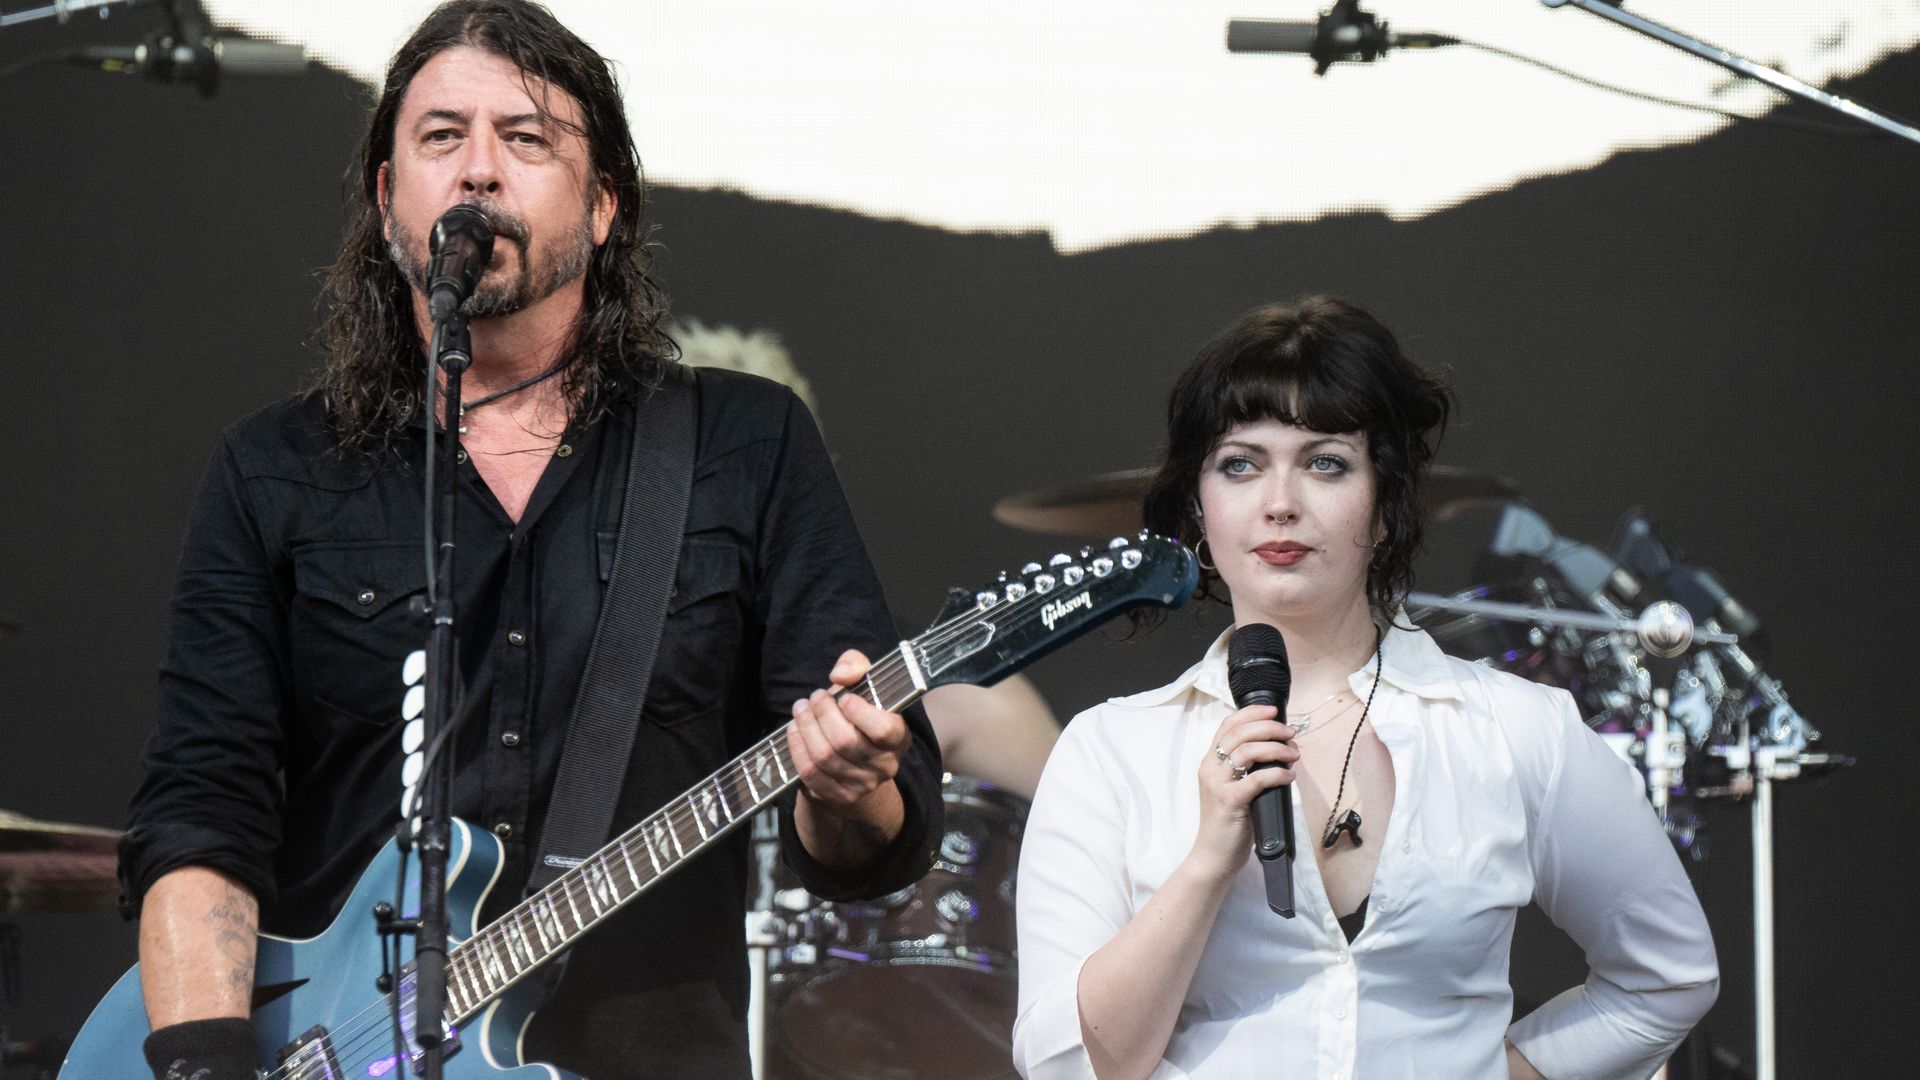 Dave Grohl from the Foo Fighters performs with his daughter Violet Grohl on The Pyramid Stage